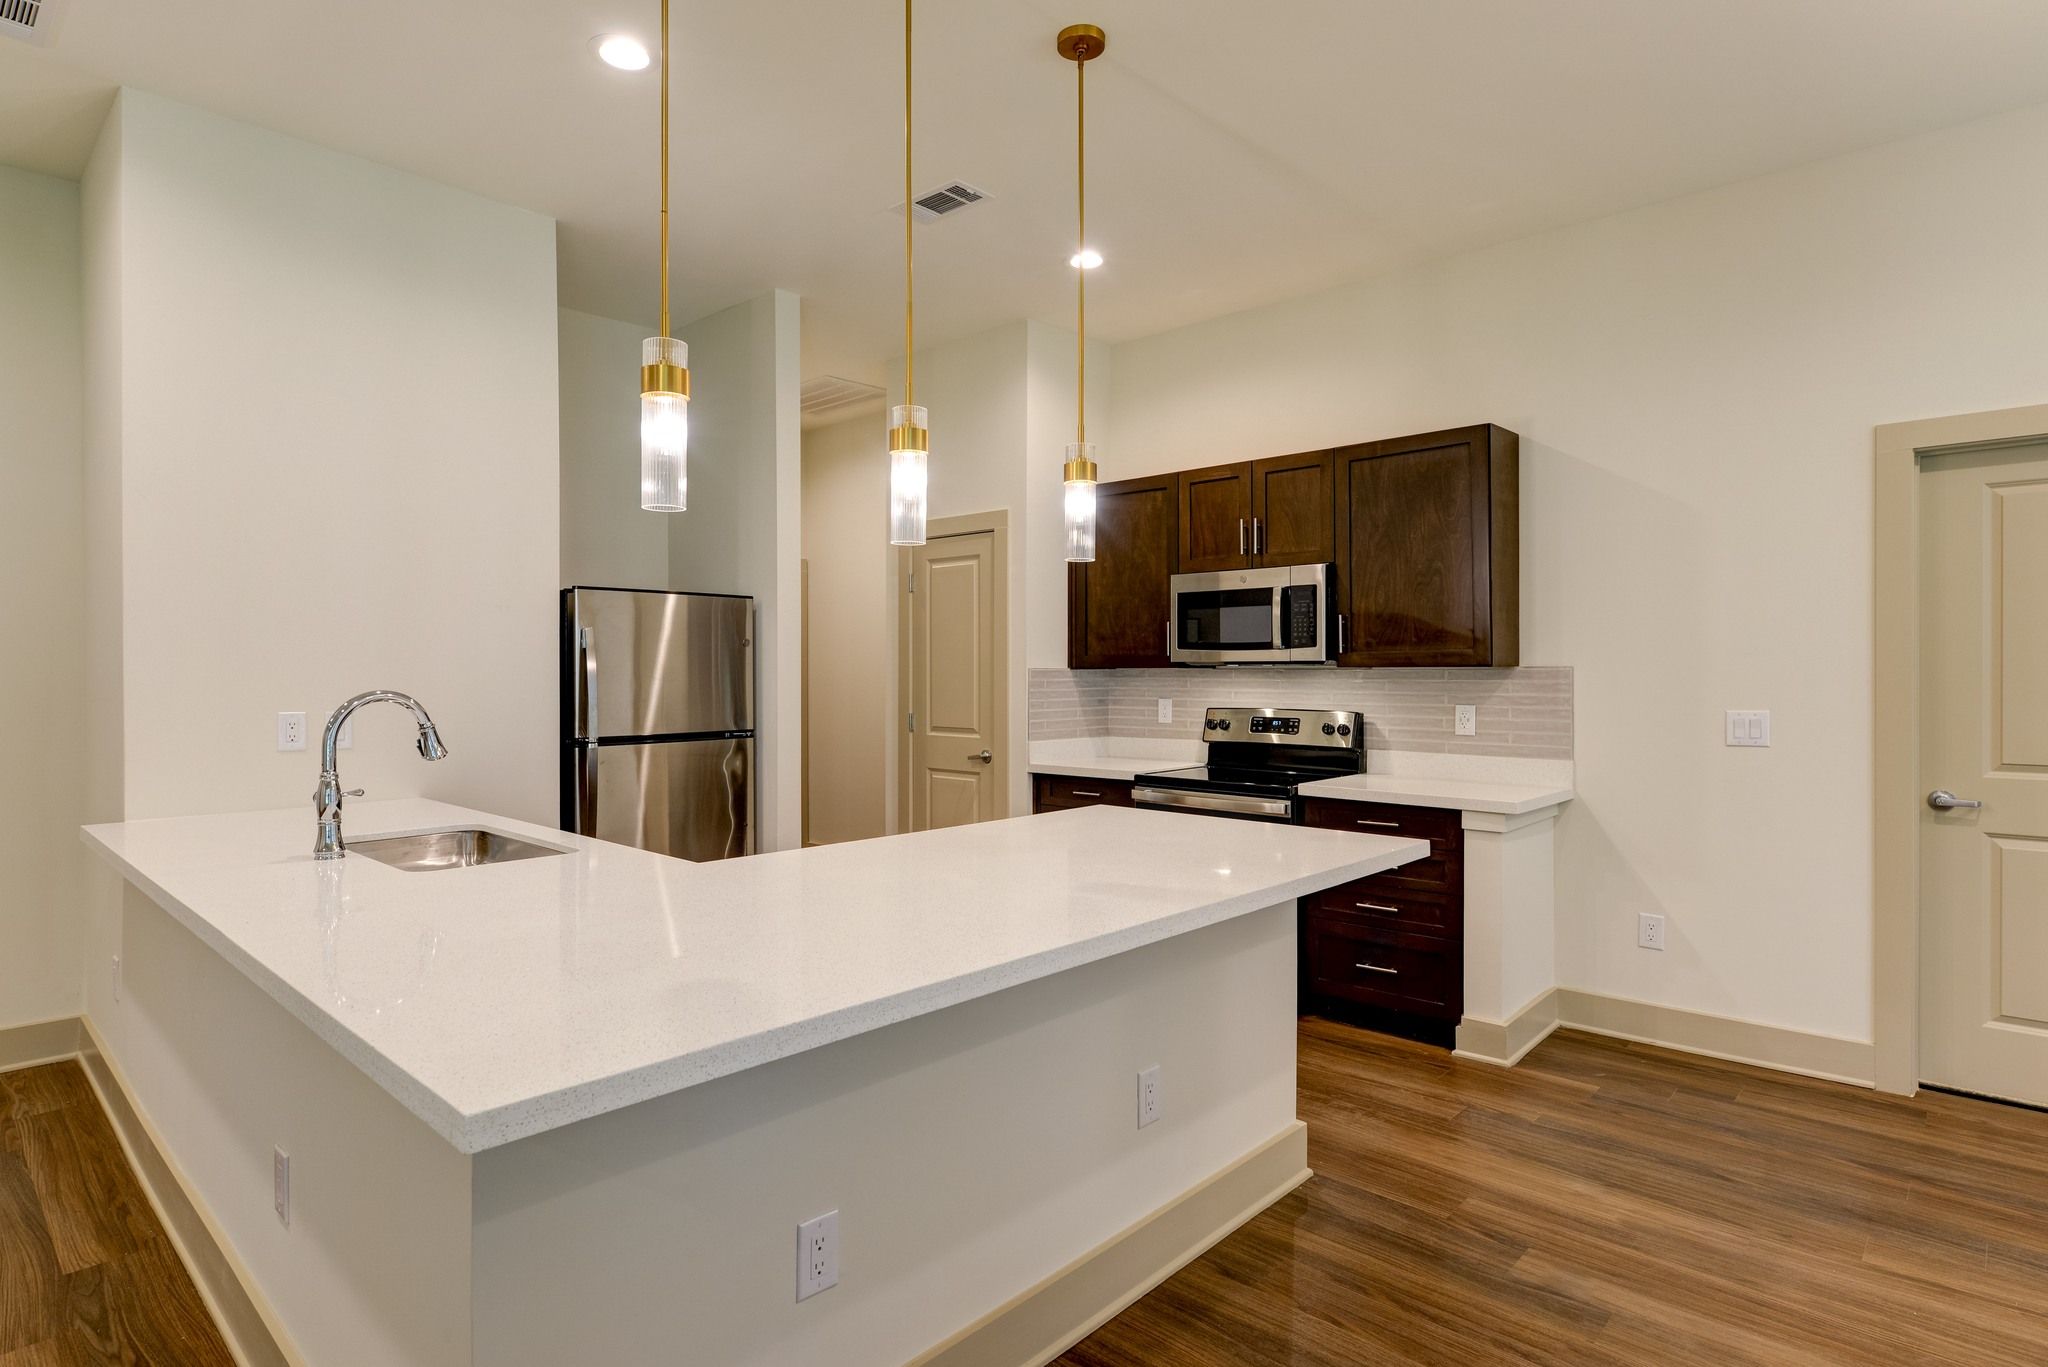 The Preserve at Meridian senior apartment full kitchen with high-end design and appliances